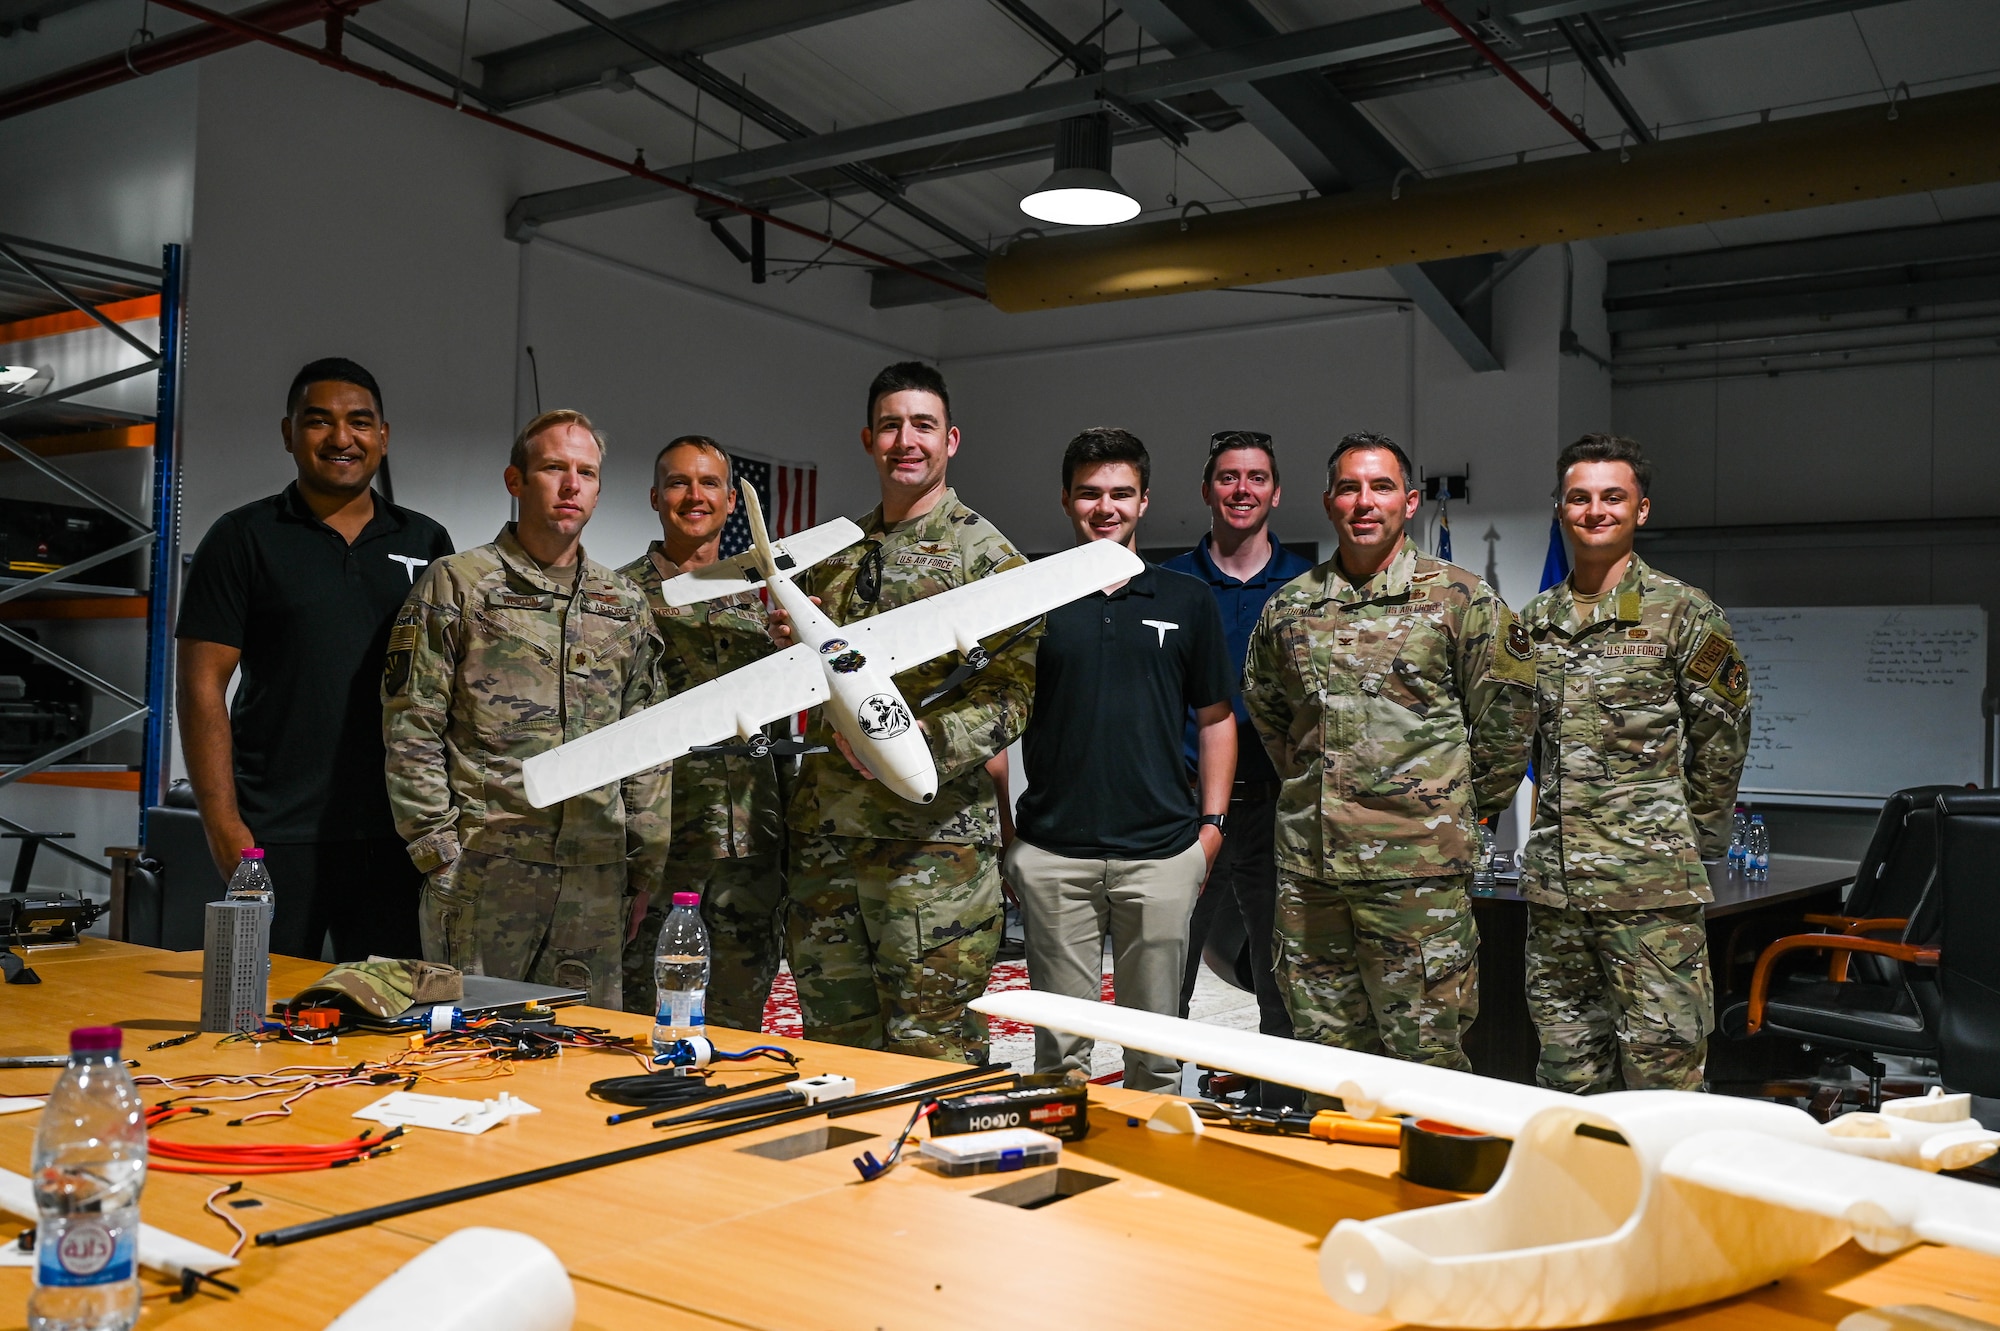 Group poses for a photo with a UAS.